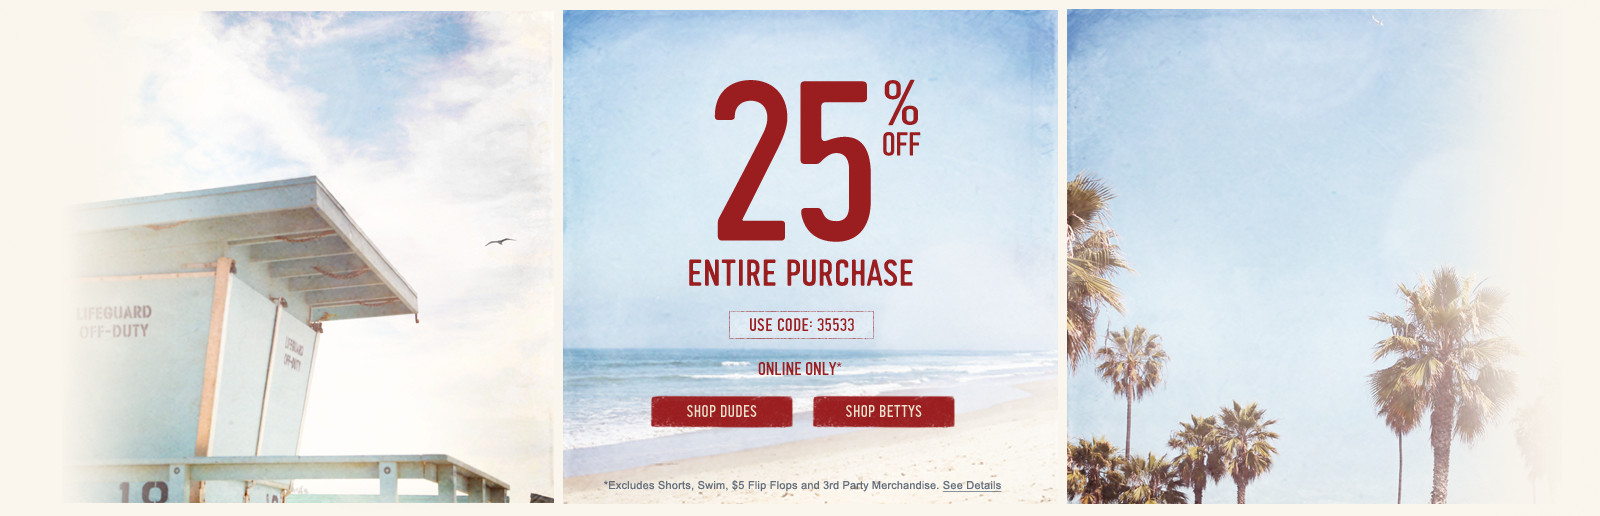 Hollister Company Canada Promotional Code: Save 25% Off ...